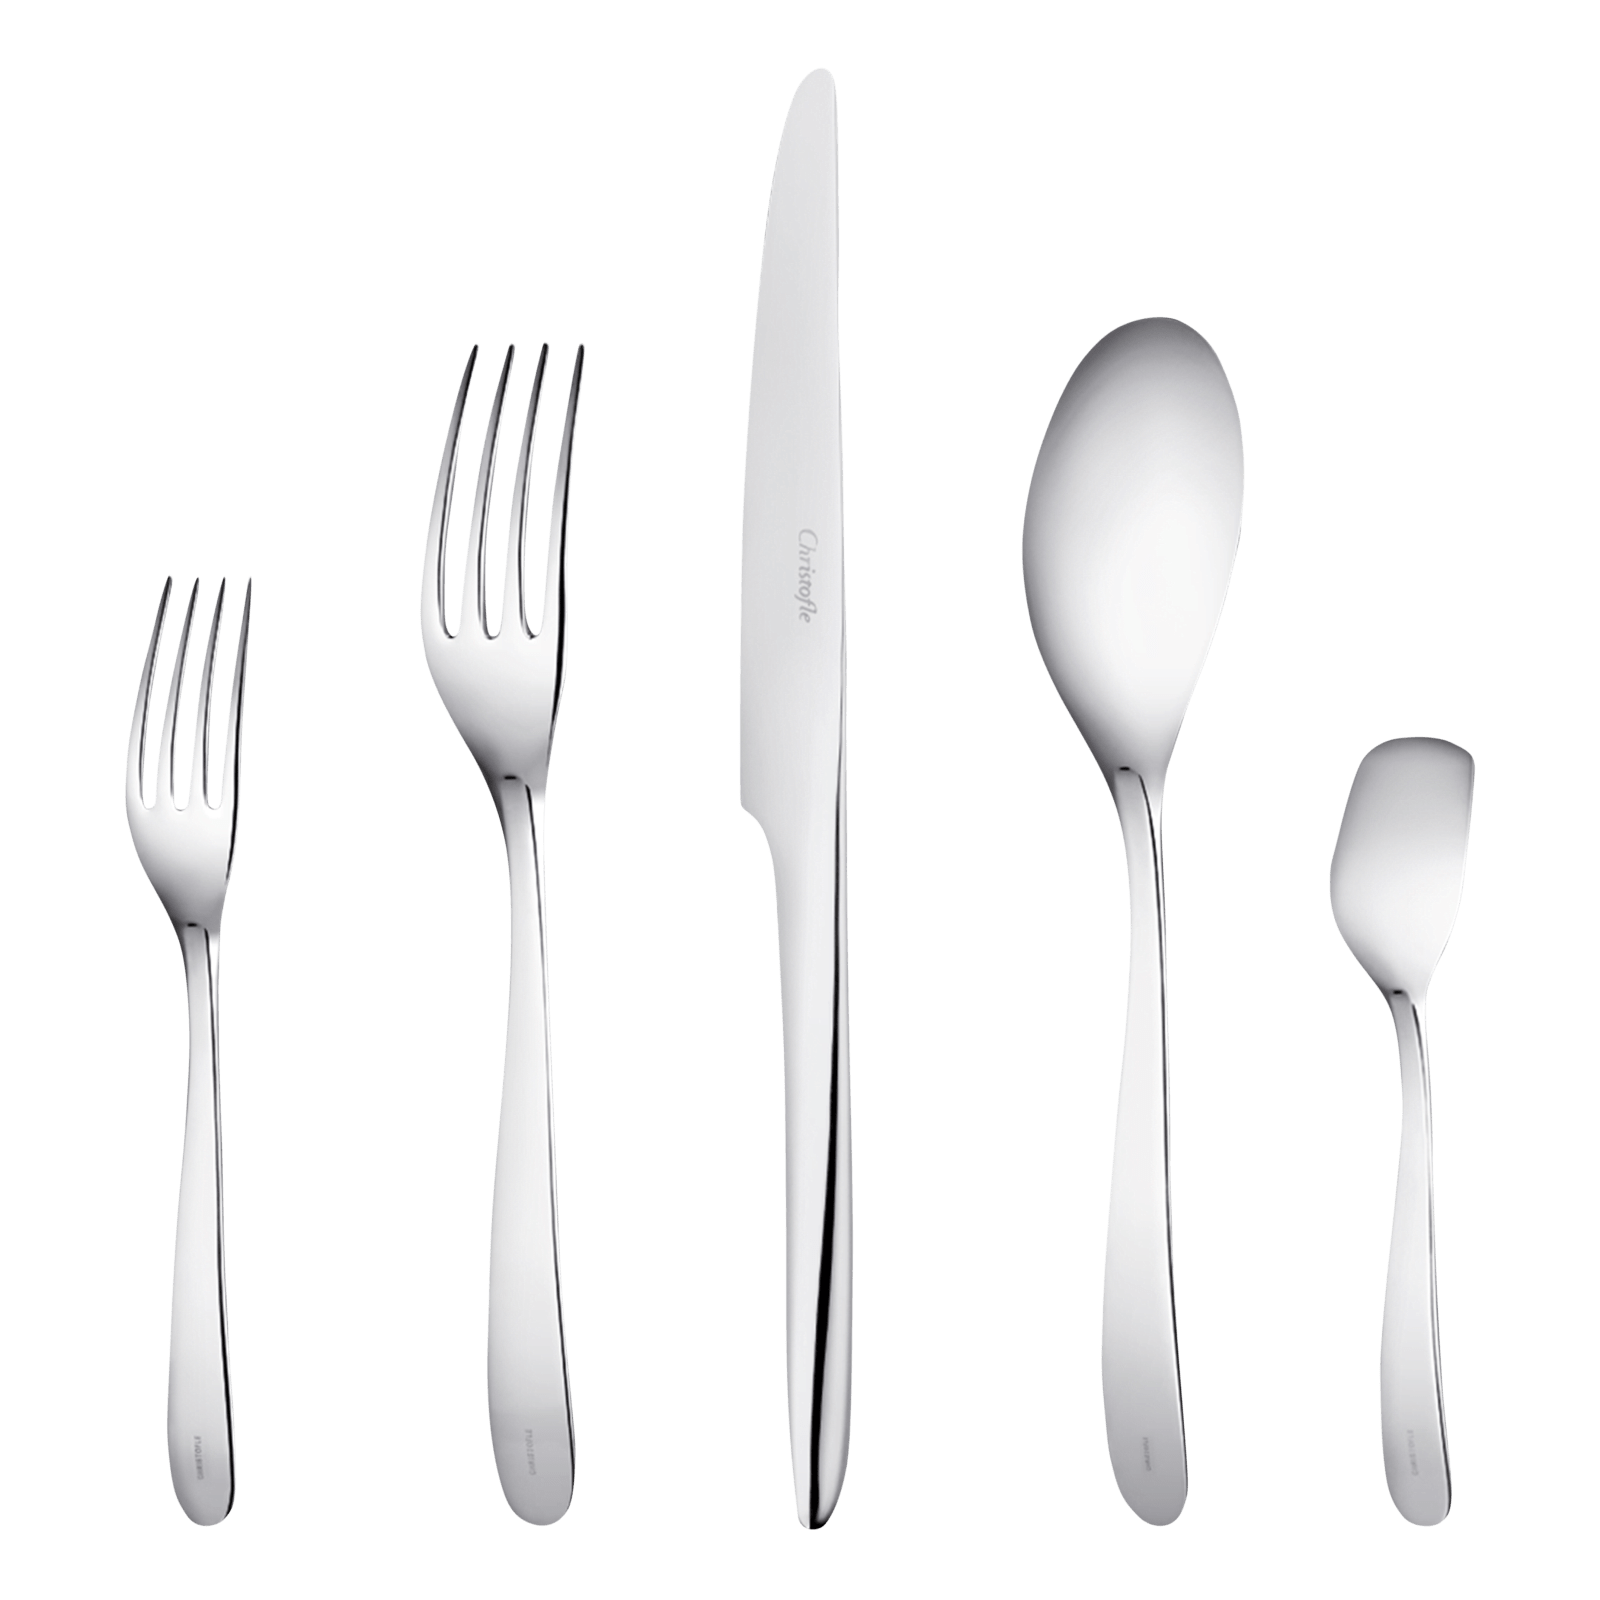 CHRISTOFLE L'AME DE CHRISTOFLE STAINLESS STEEL 5-PC PLACE SETTING #2401185 F/SH 